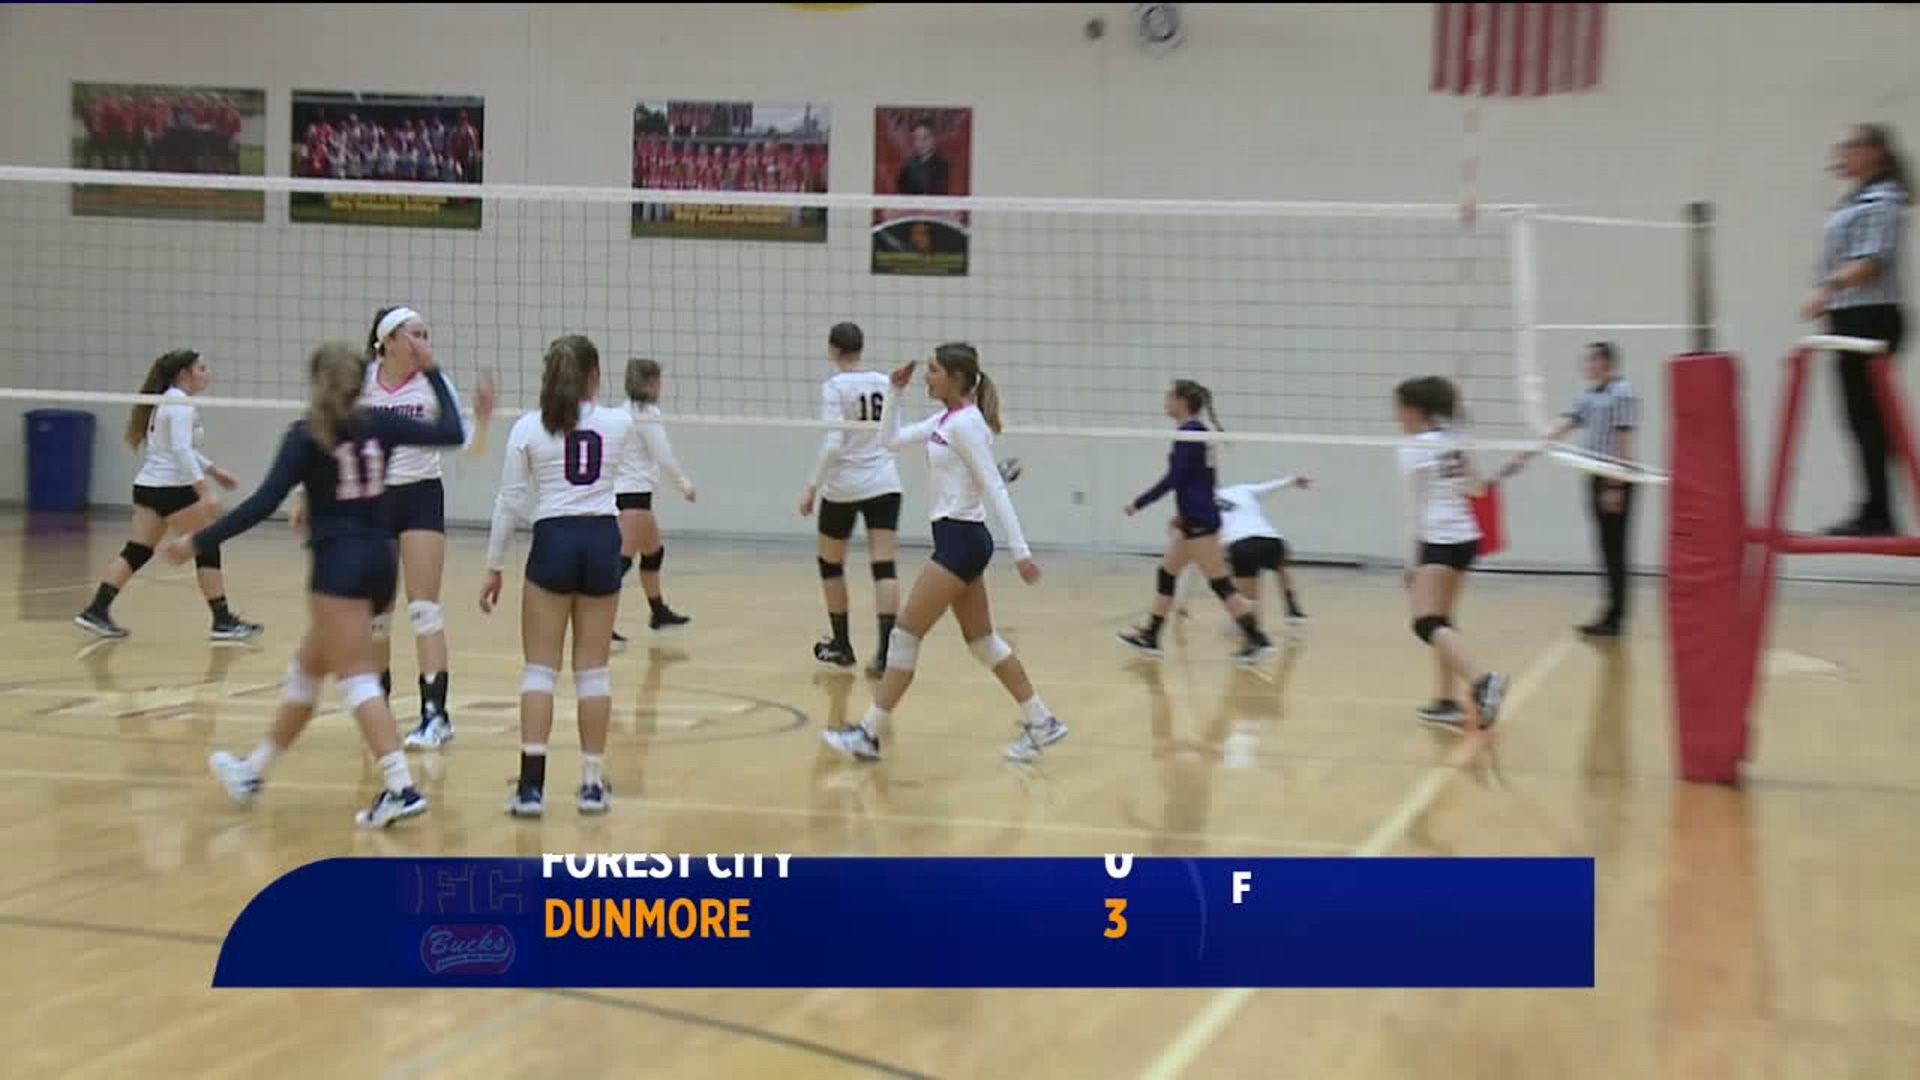 Dunmore vs Forest City girls volleyball